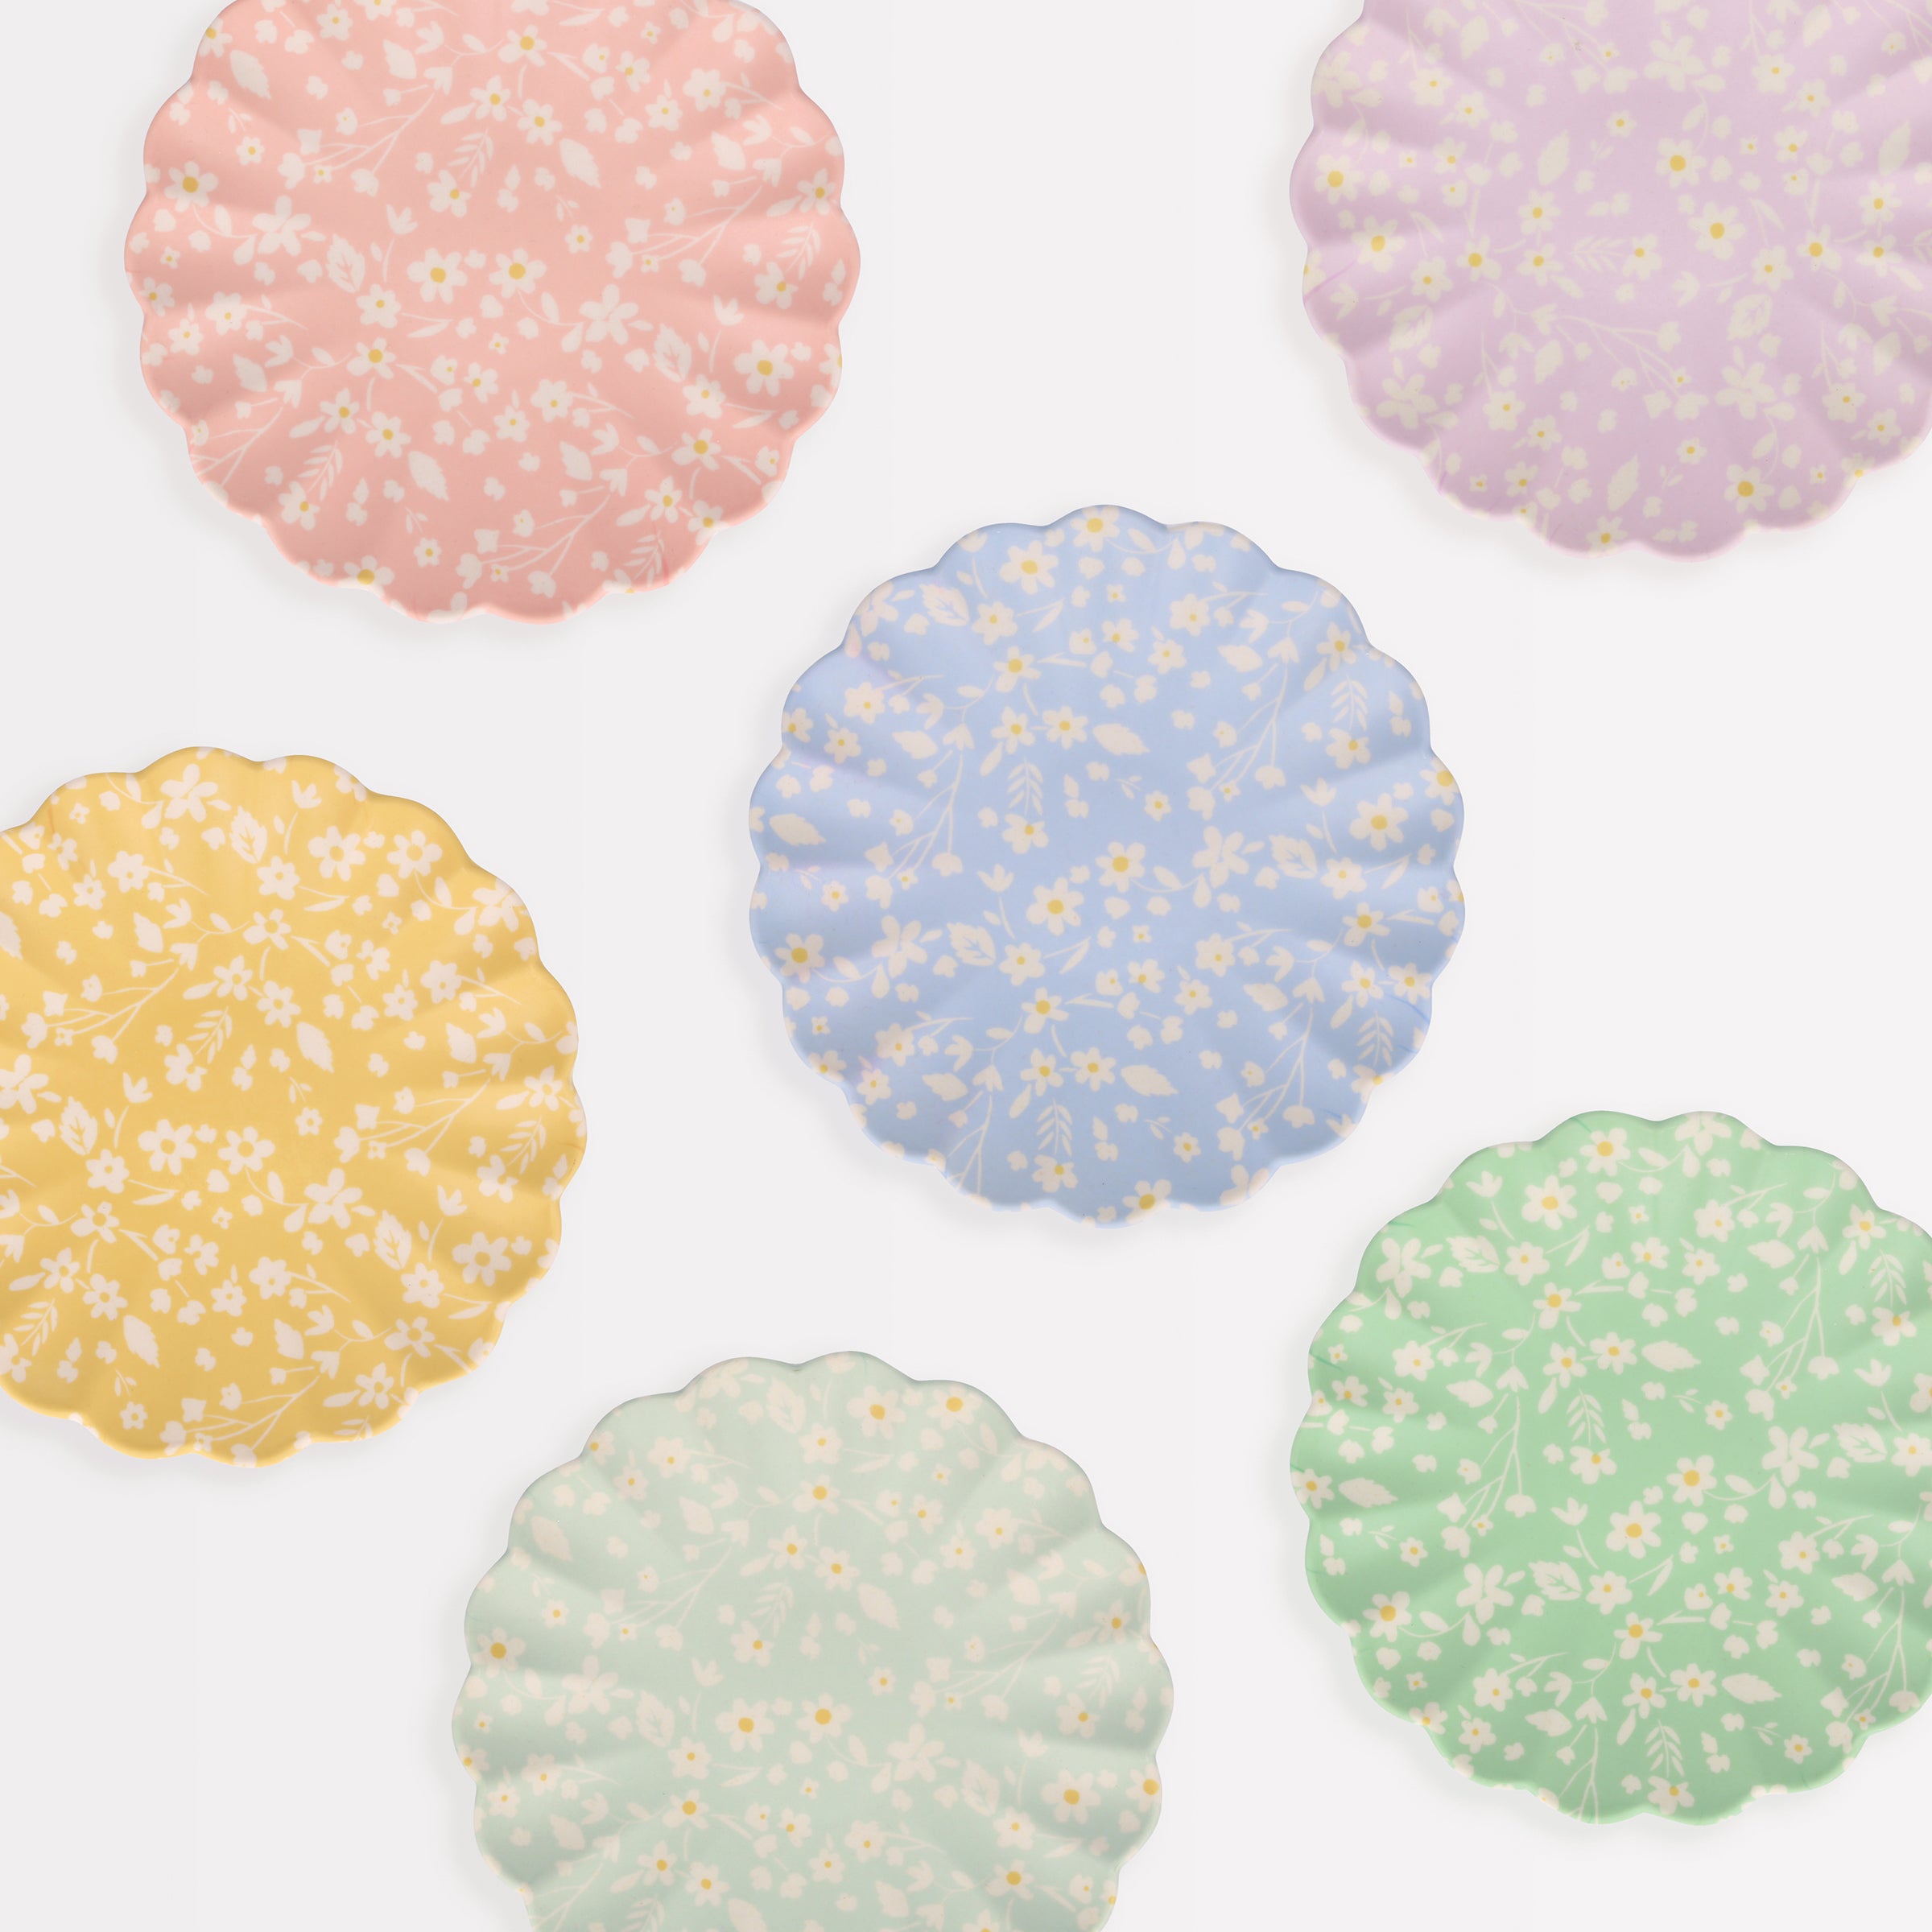 Our beautiful plates made from bamboo are colorful floral plates.